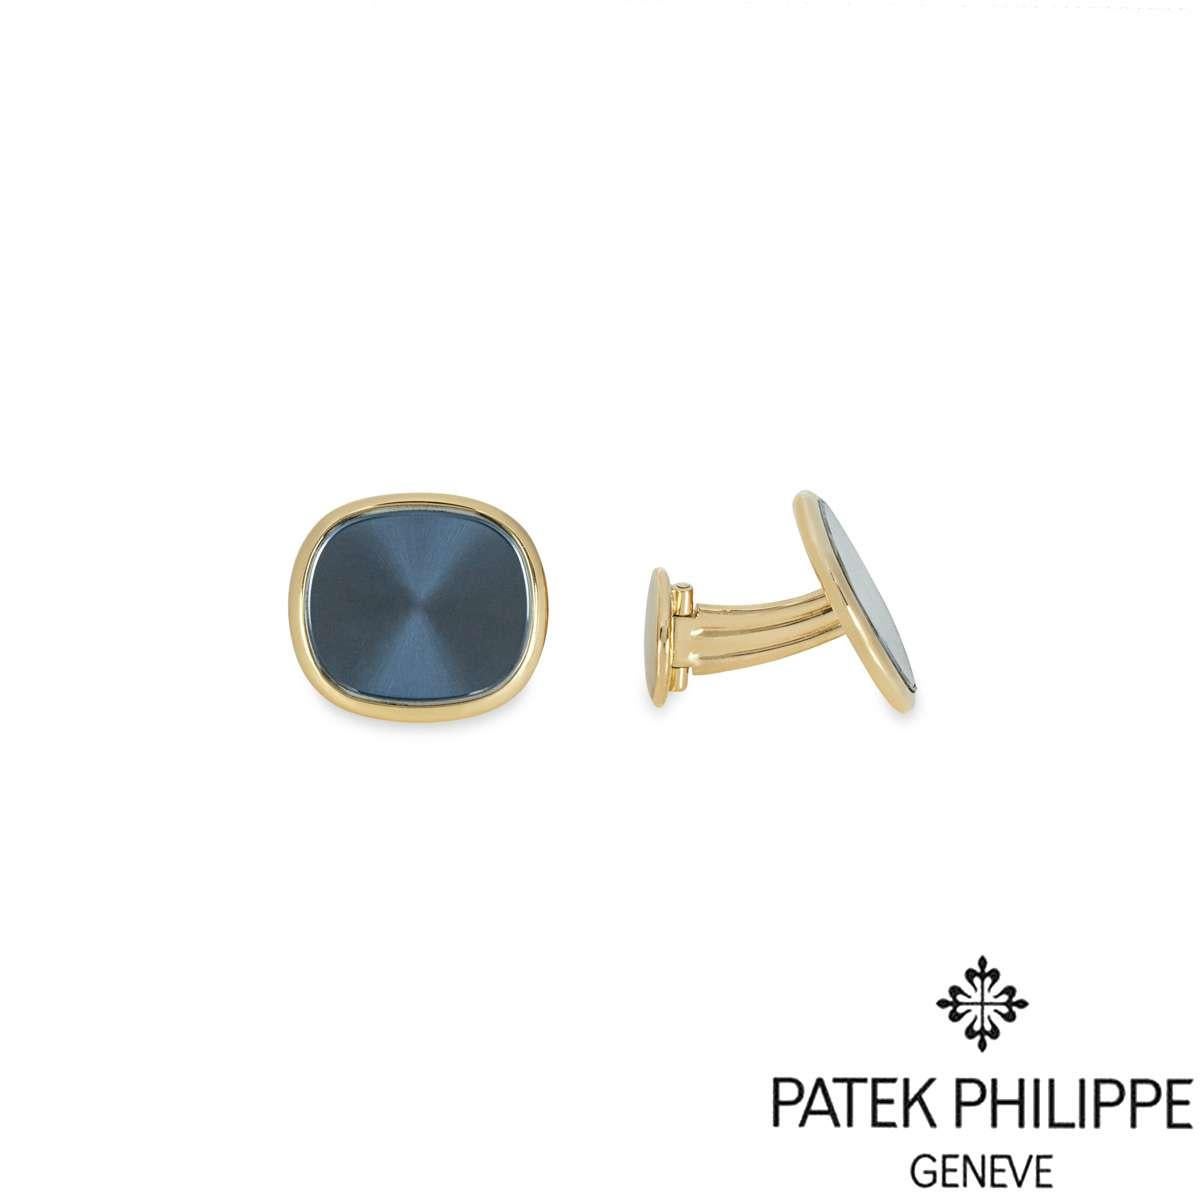 Patek Philippe Yellow Gold Ellipse Cufflinks In Excellent Condition For Sale In London, GB